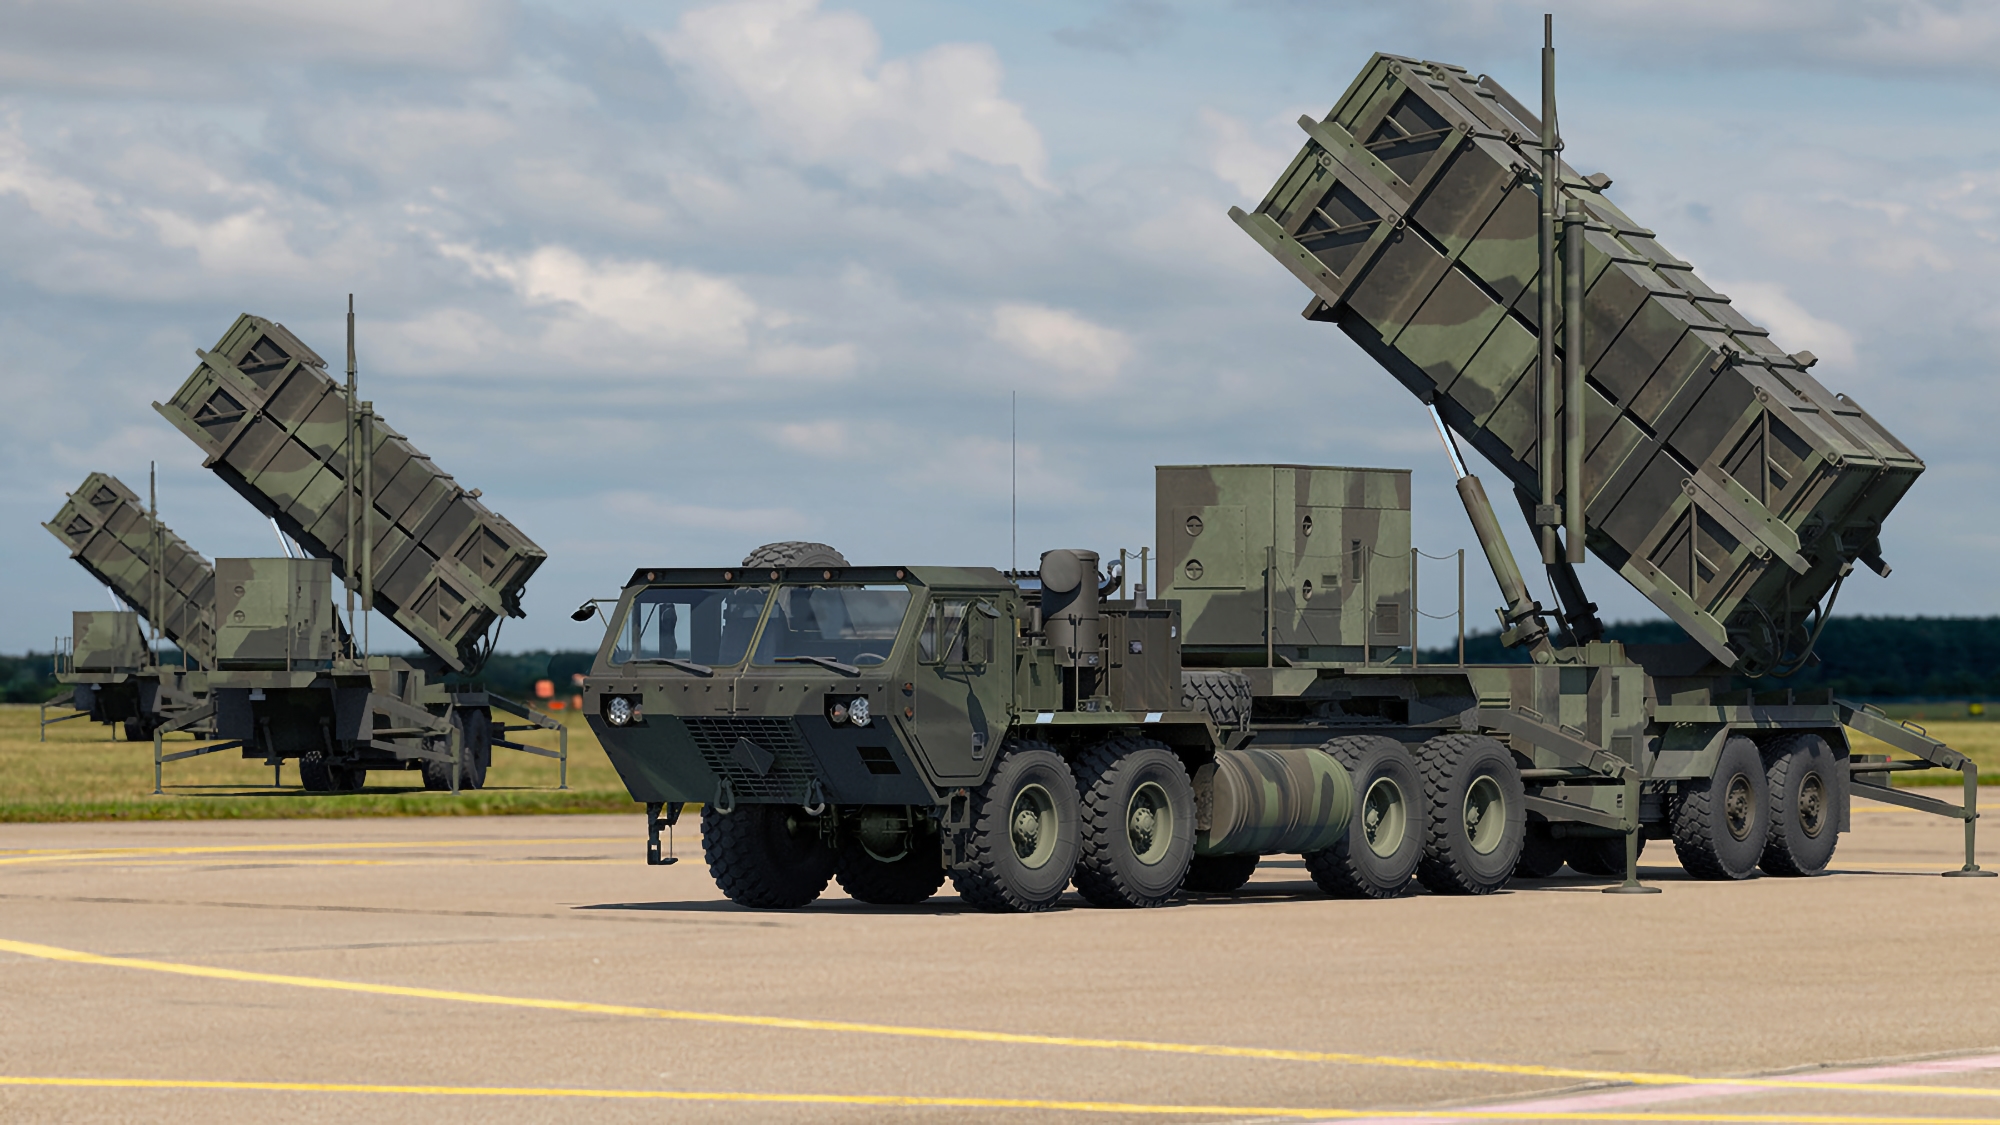 Bloomberg: Germany is considering sending Ukraine a fourth Patriot system that can shoot down ballistic missiles